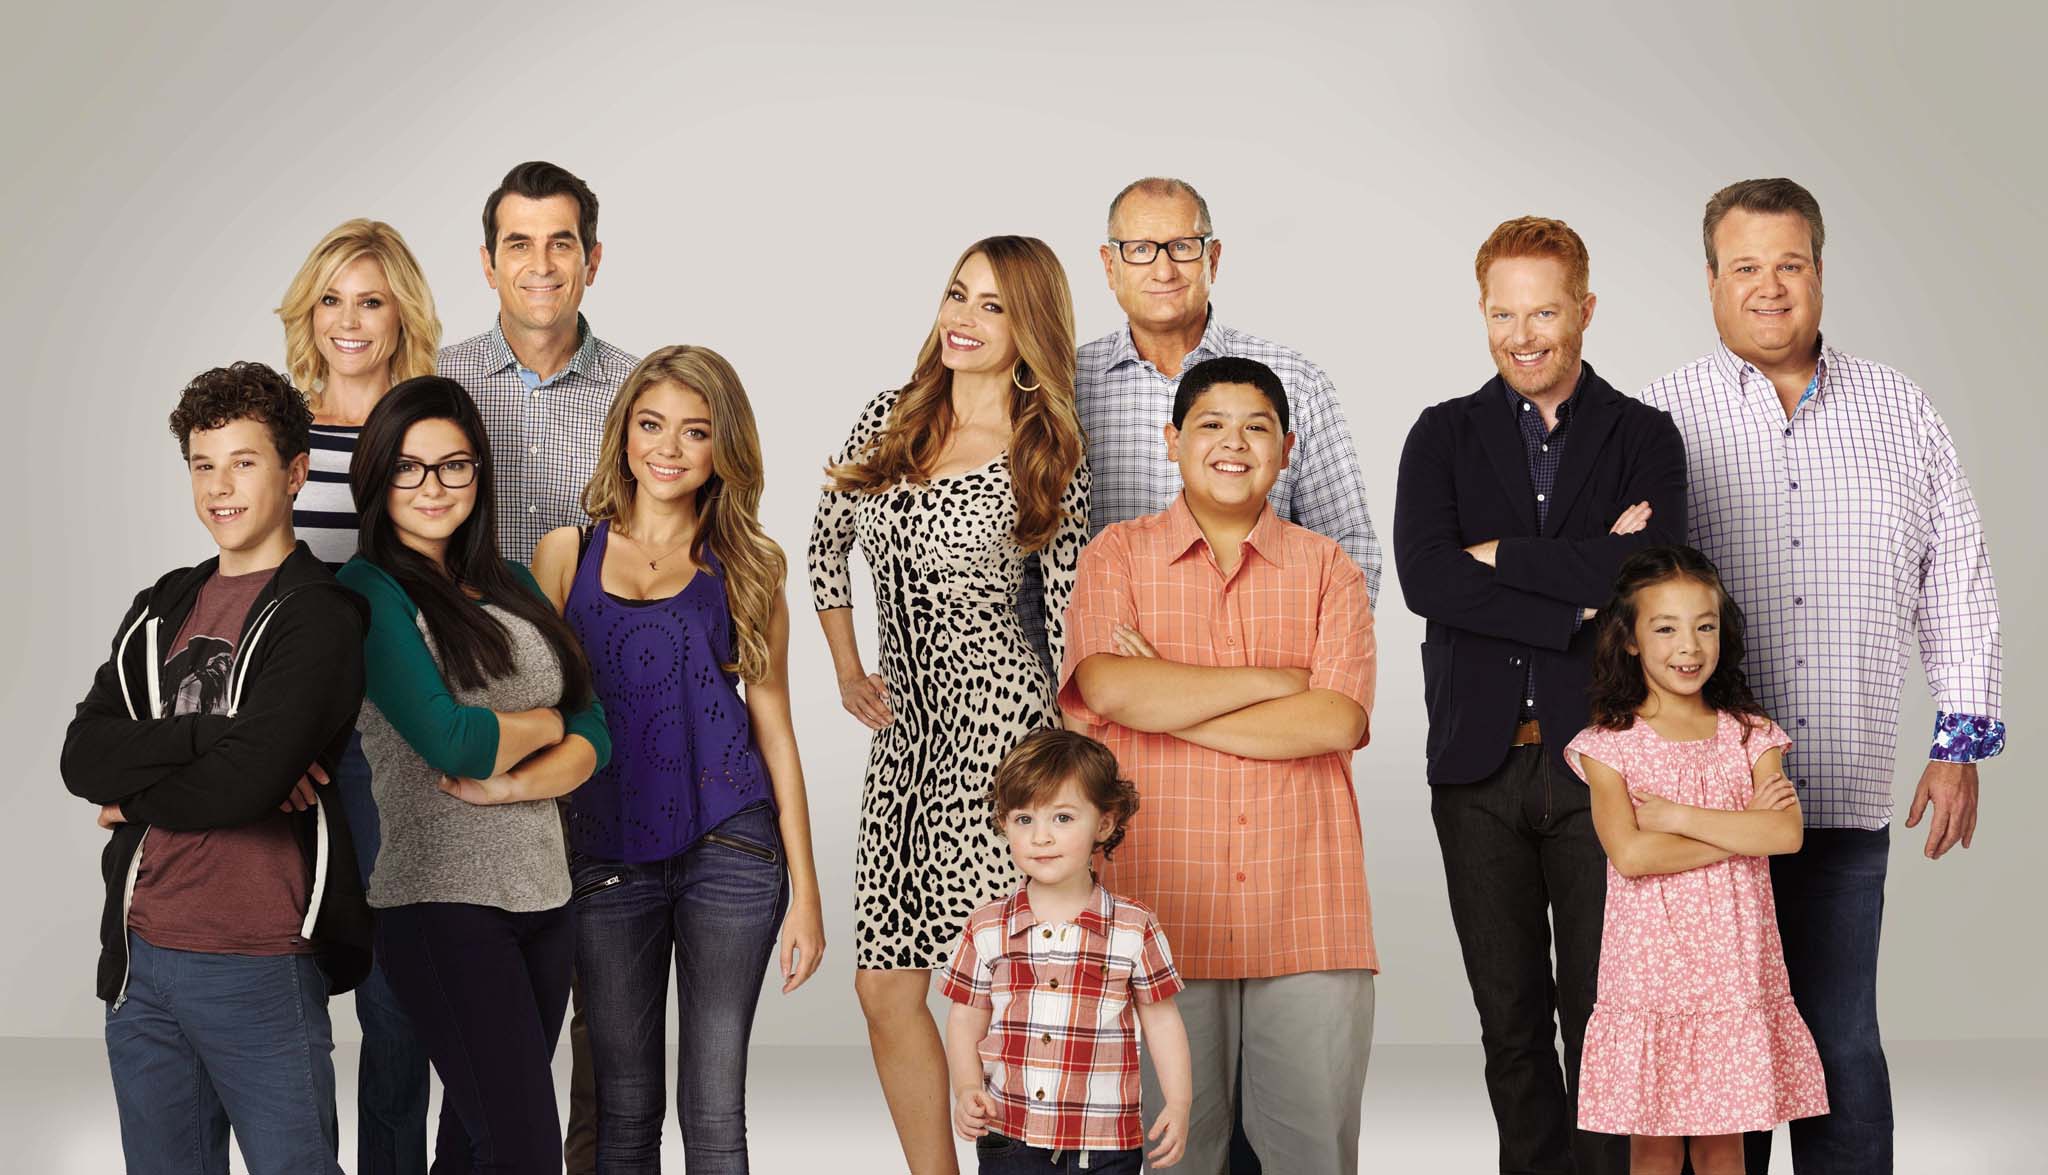 The cast of Modern Family, now in its sixth season; Claire (Julie Bowen) is second from left